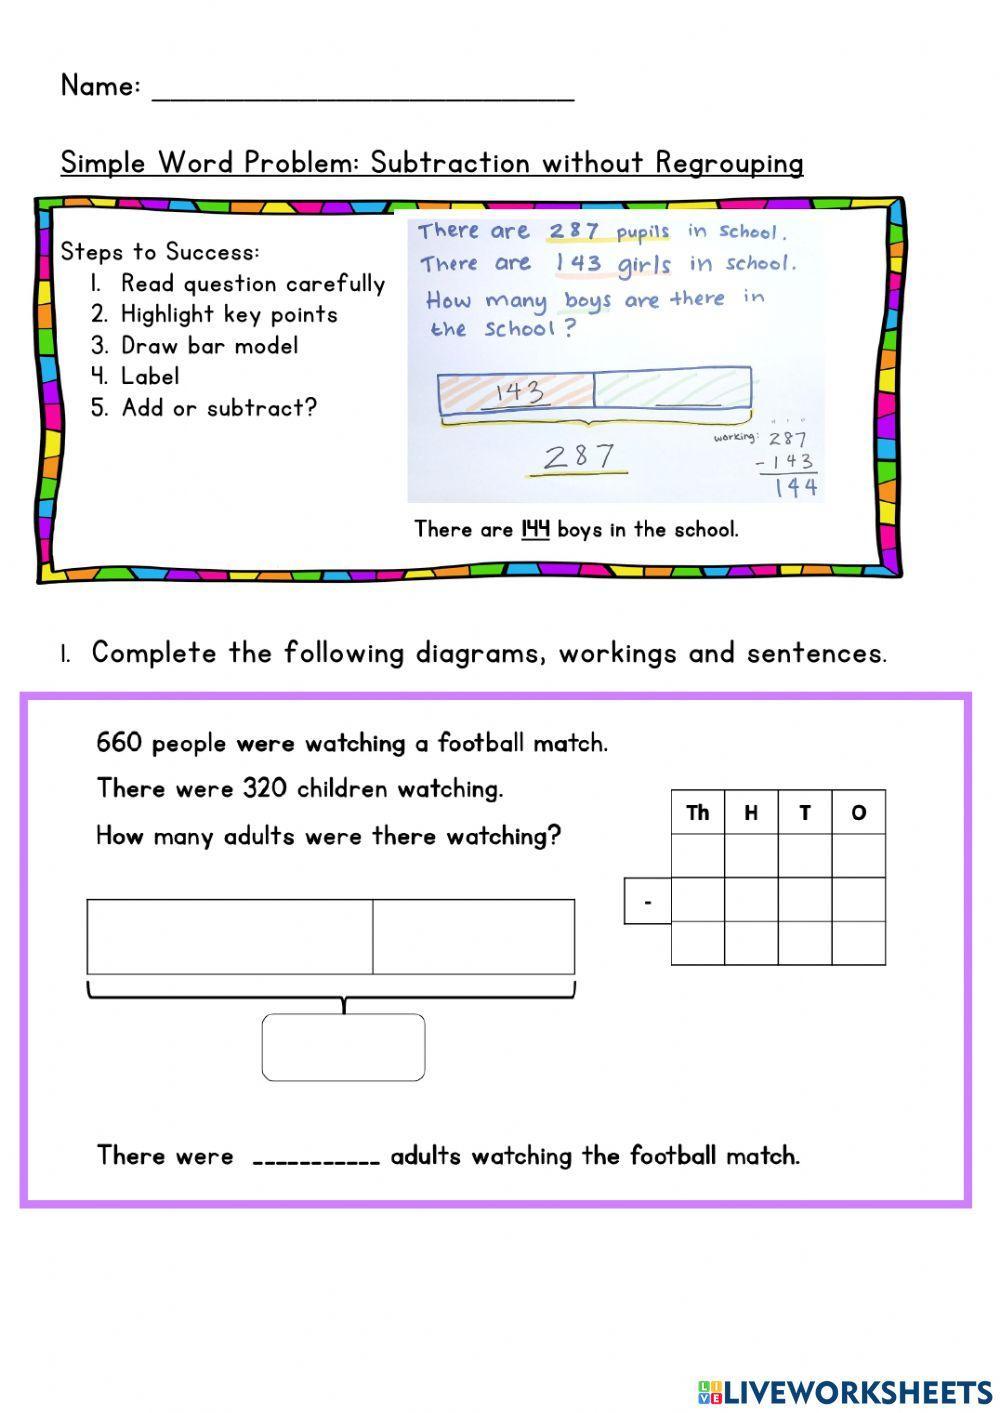 Simple Word Problem Subtraction Without Regrouping